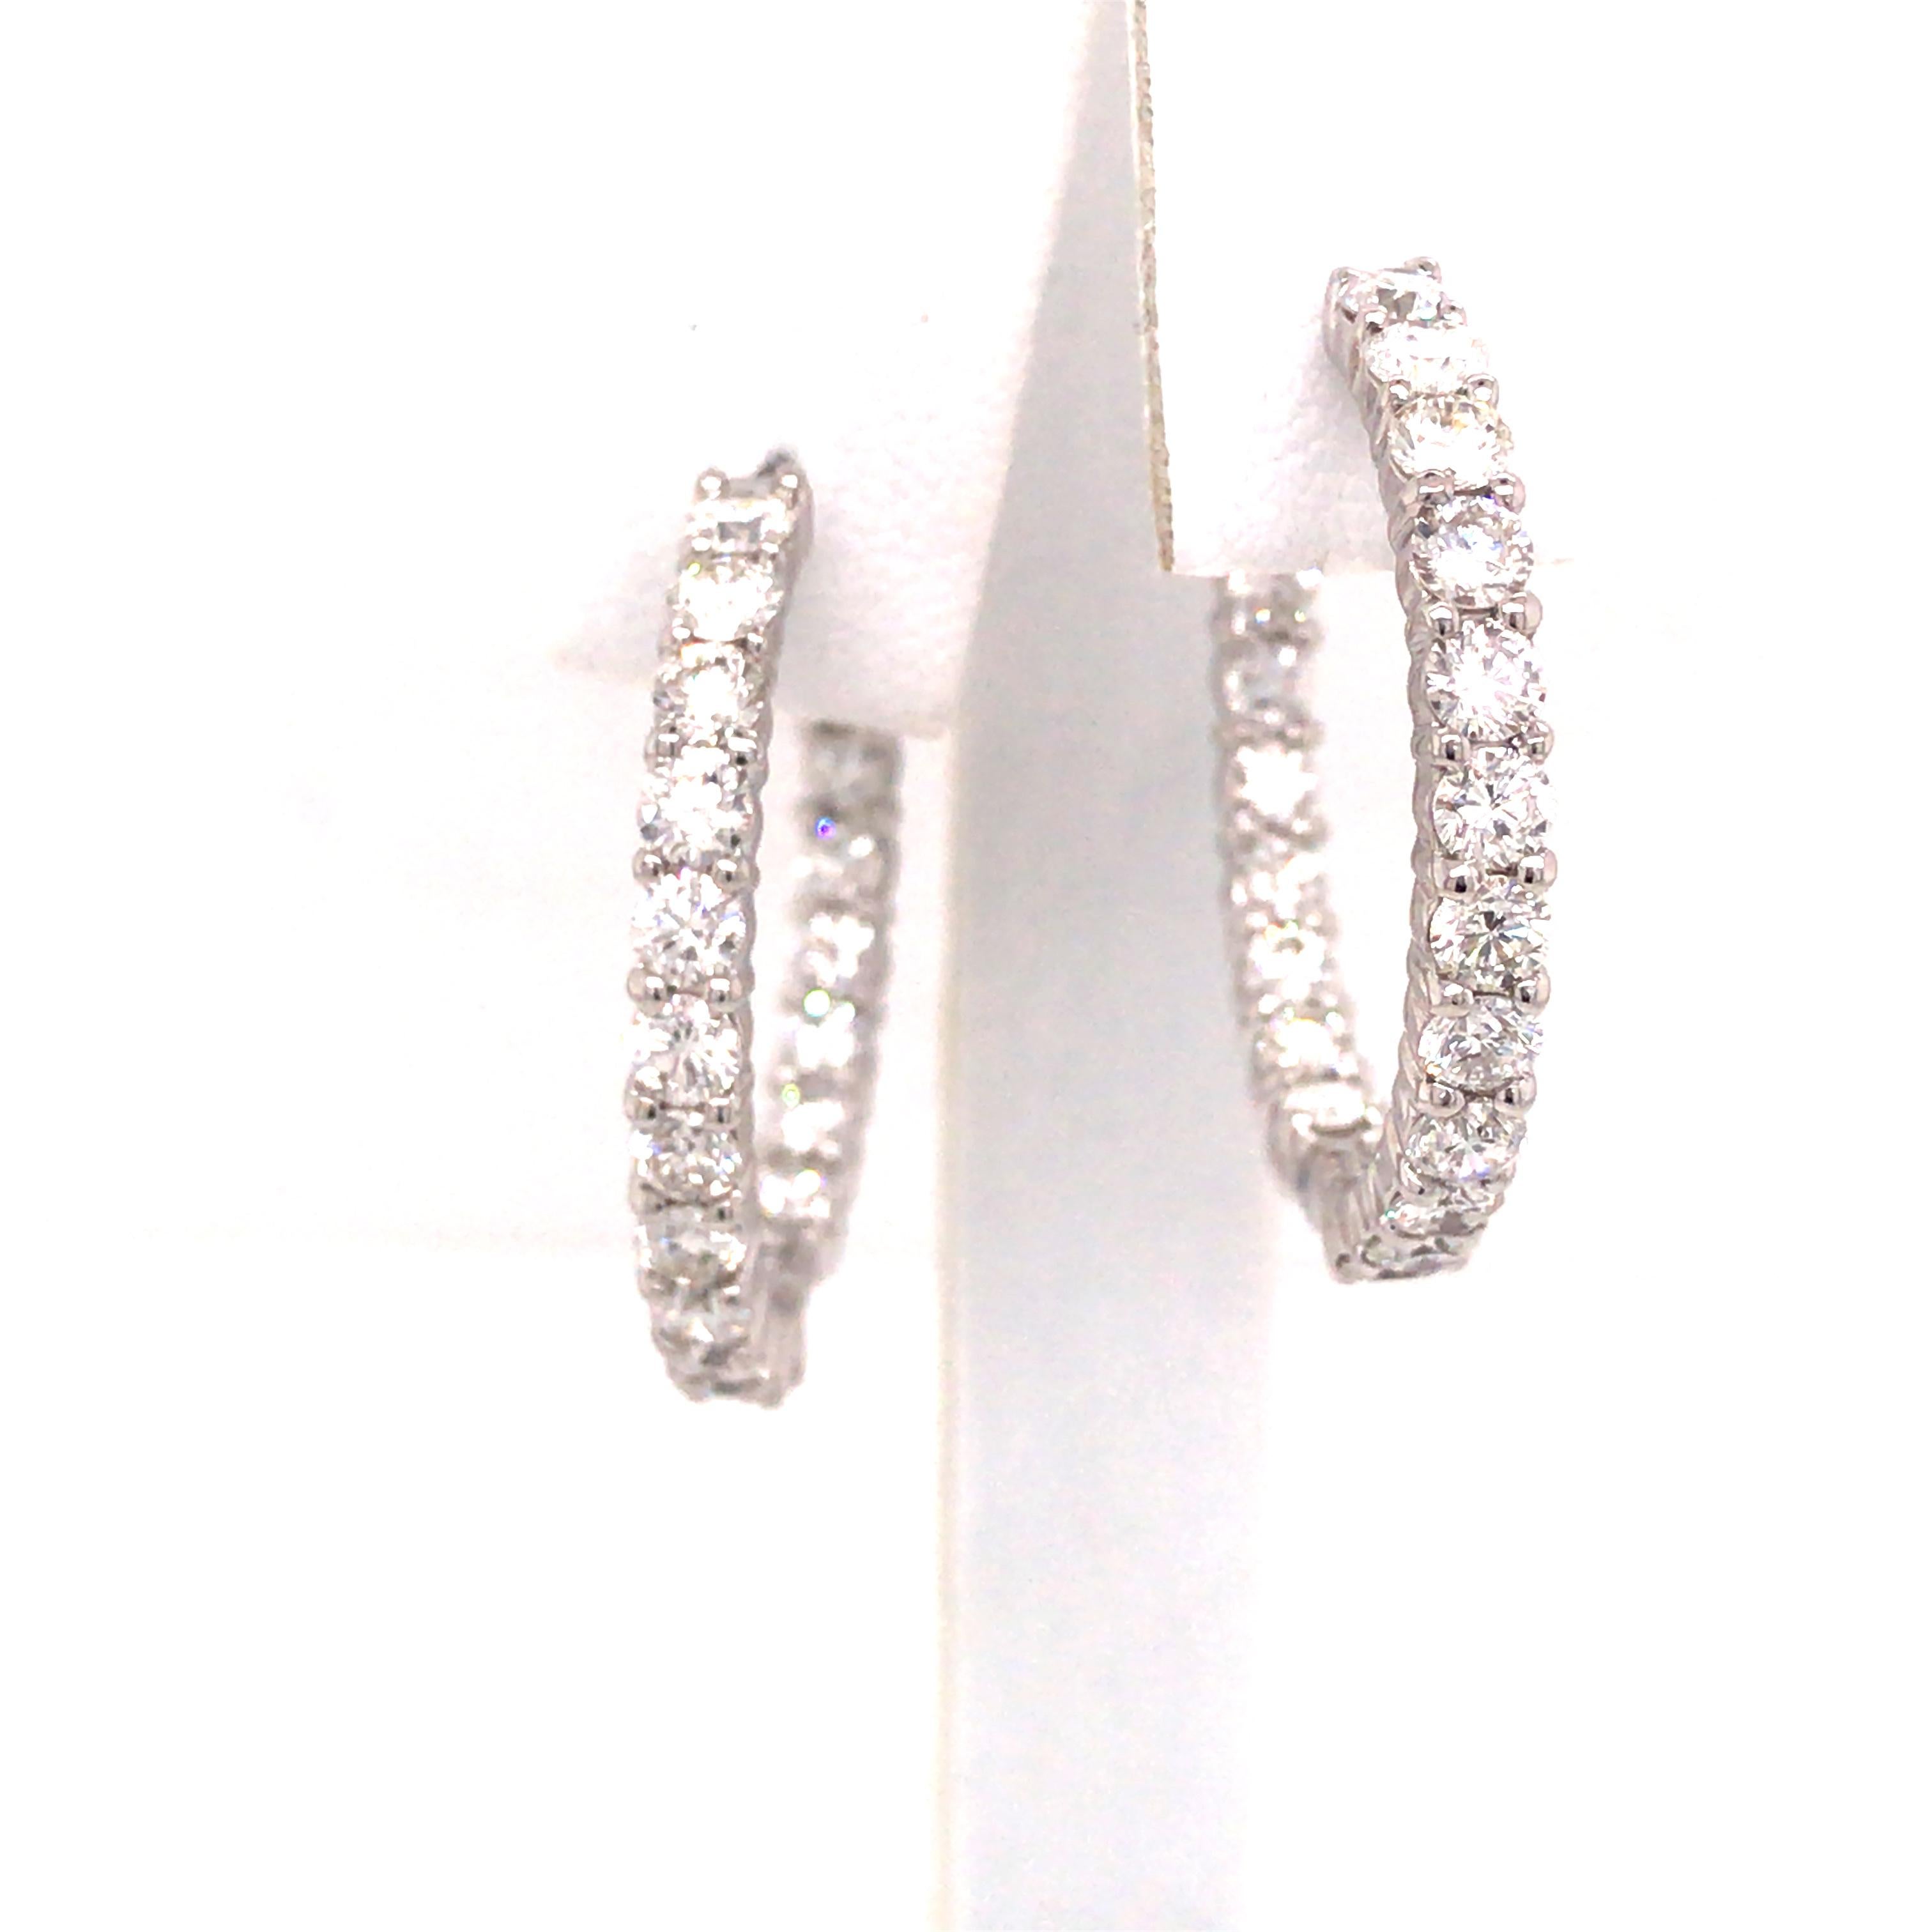 Roberto Coin Diamond In/Out Hoops in 18K White Gold.  (44) Round Brilliant Cut Diamonds weighing 4.40 carat total weight, G-H in color and VS-SI in clarity are expertly set.  The Earring measure 1 inch in diameter and 1/8 inch in width.  Stamped